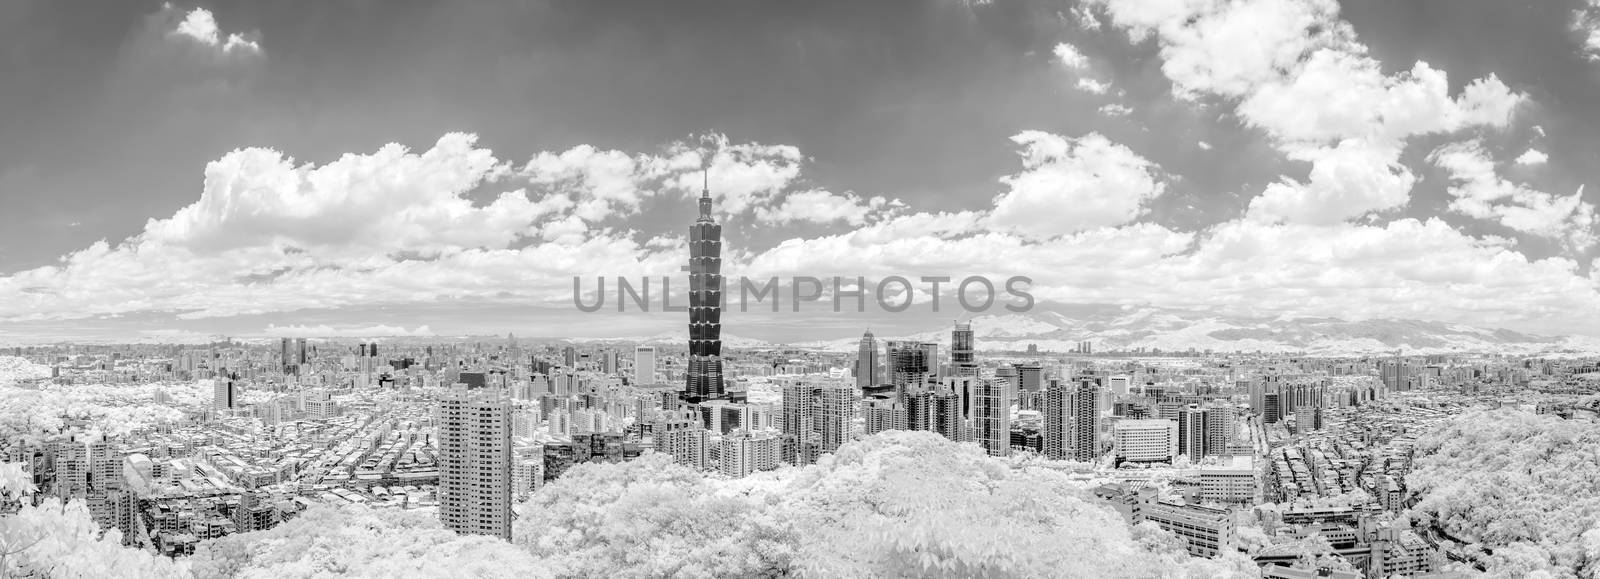 Taipei cityscape with dramatic clouds at sky, infrared photography in black and white.